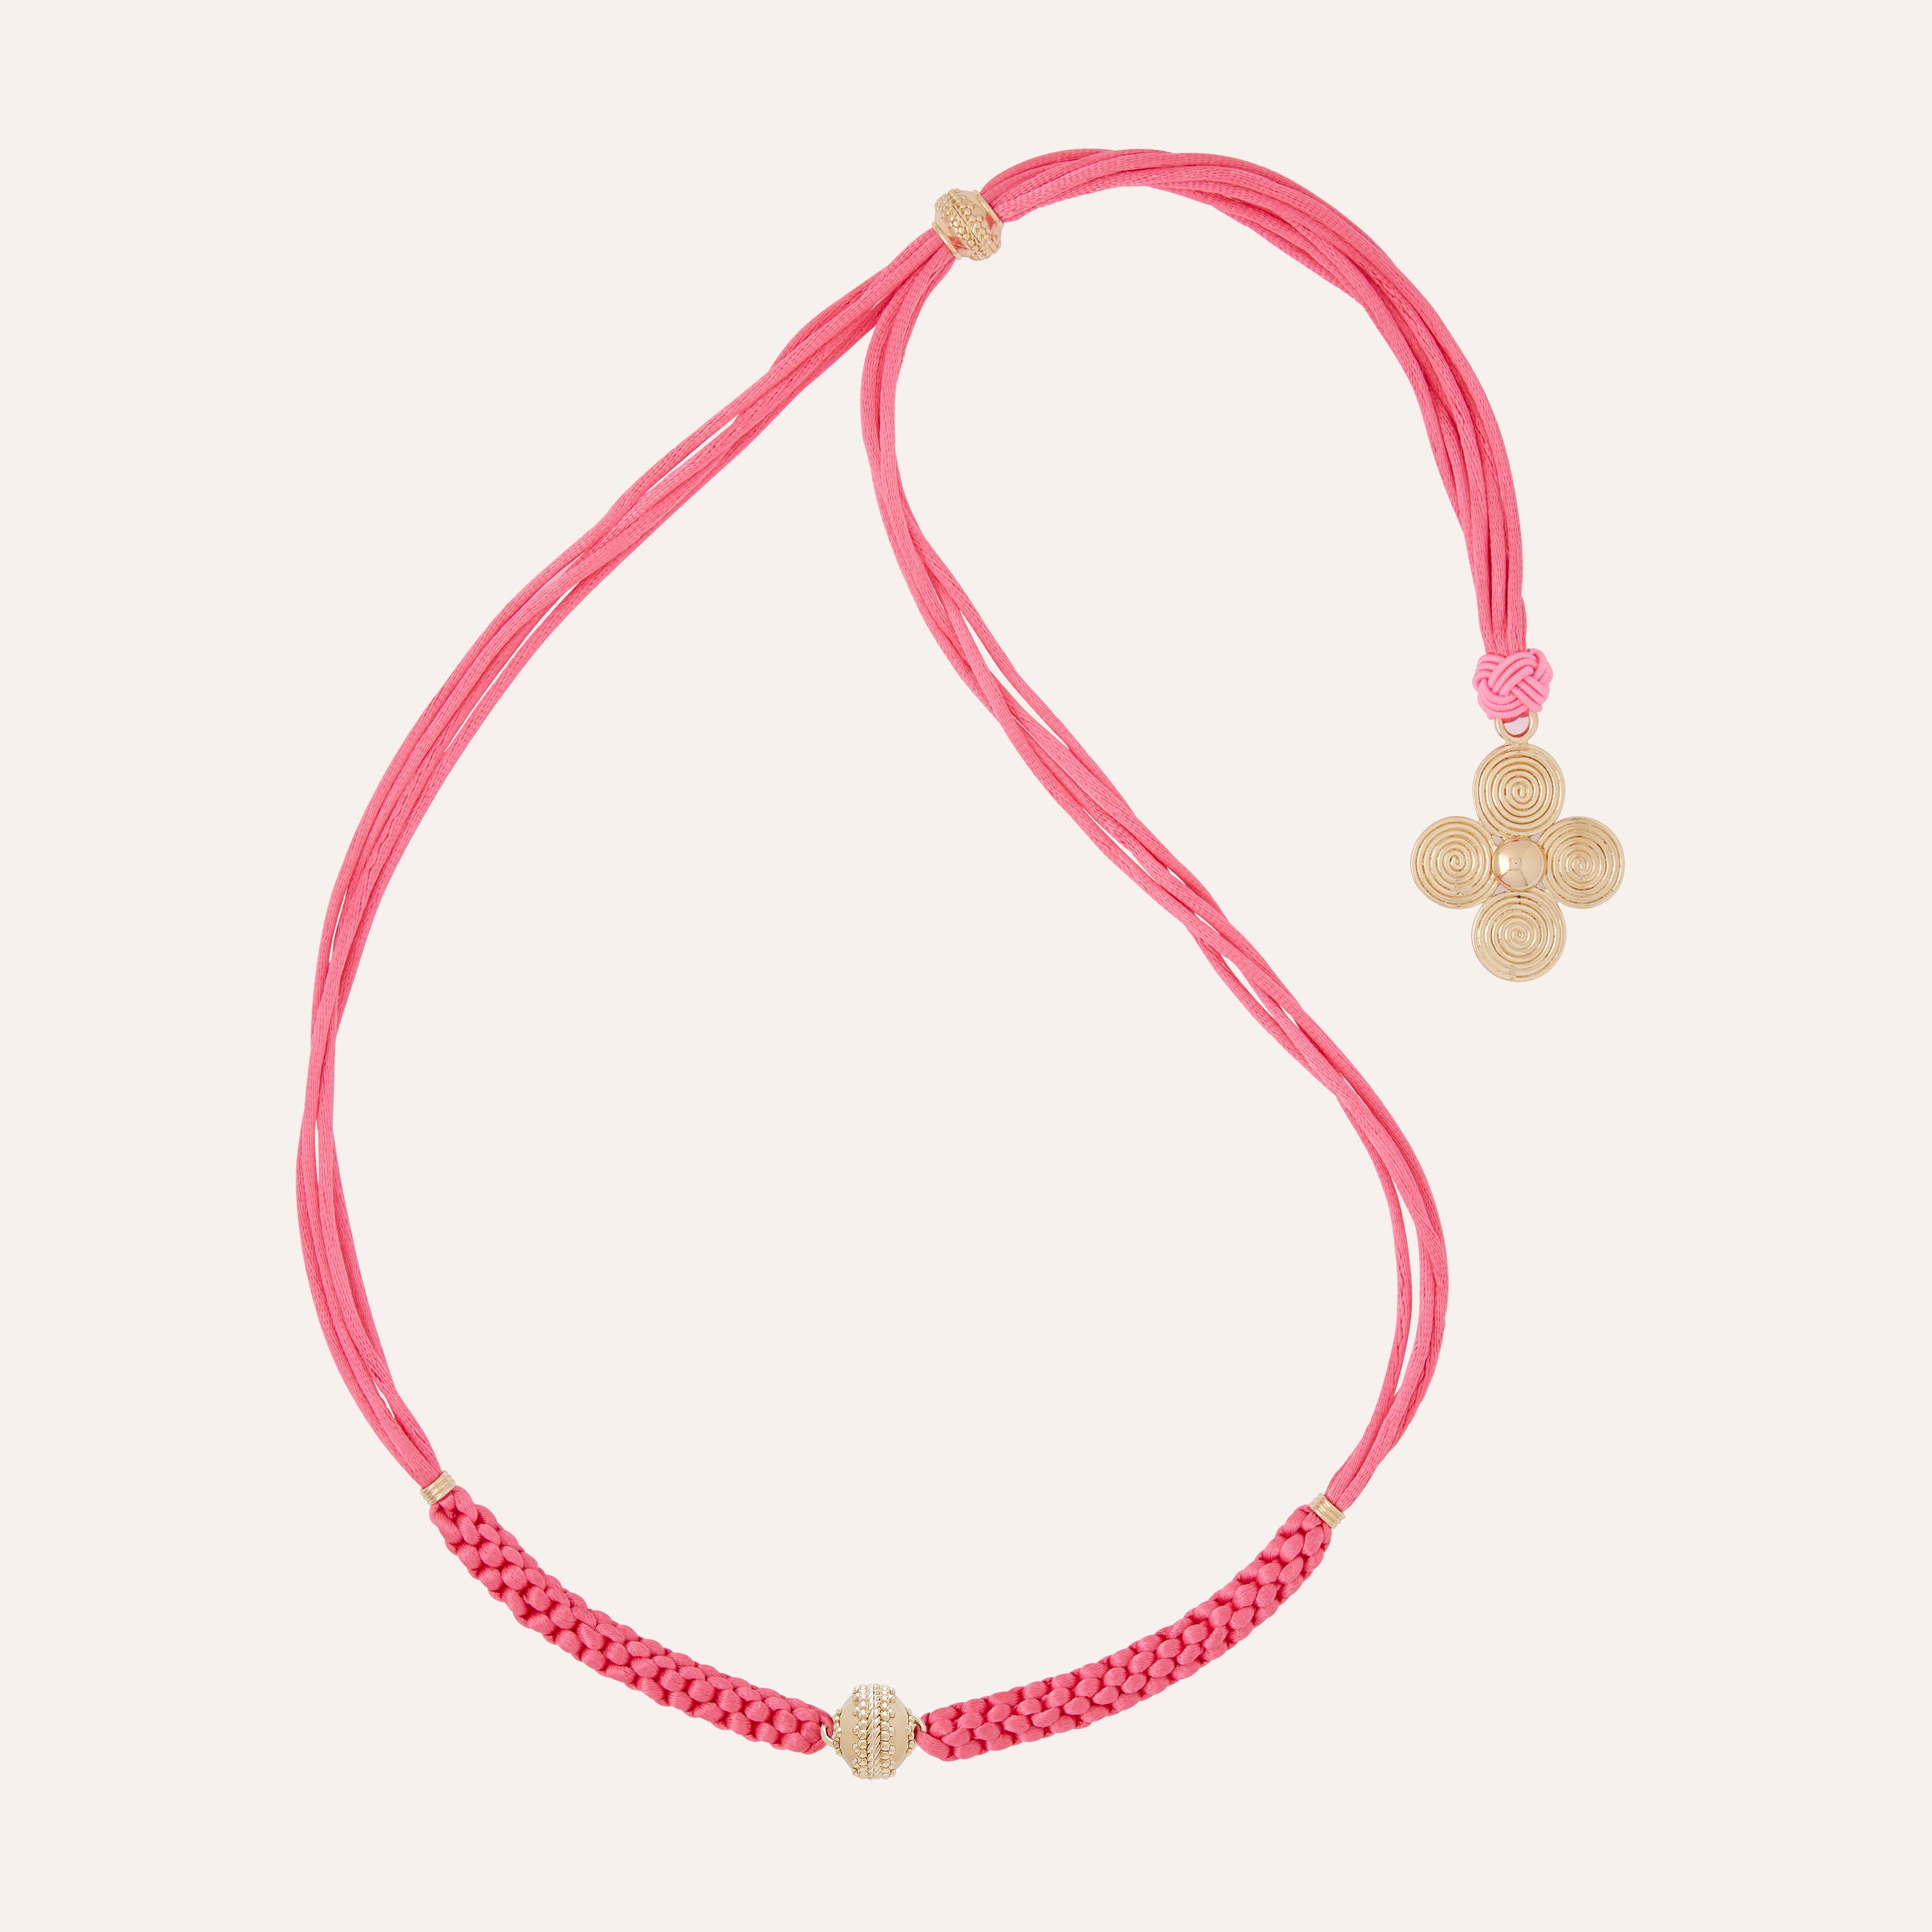 Knotted Heritage Petal Hot Pink Necklace